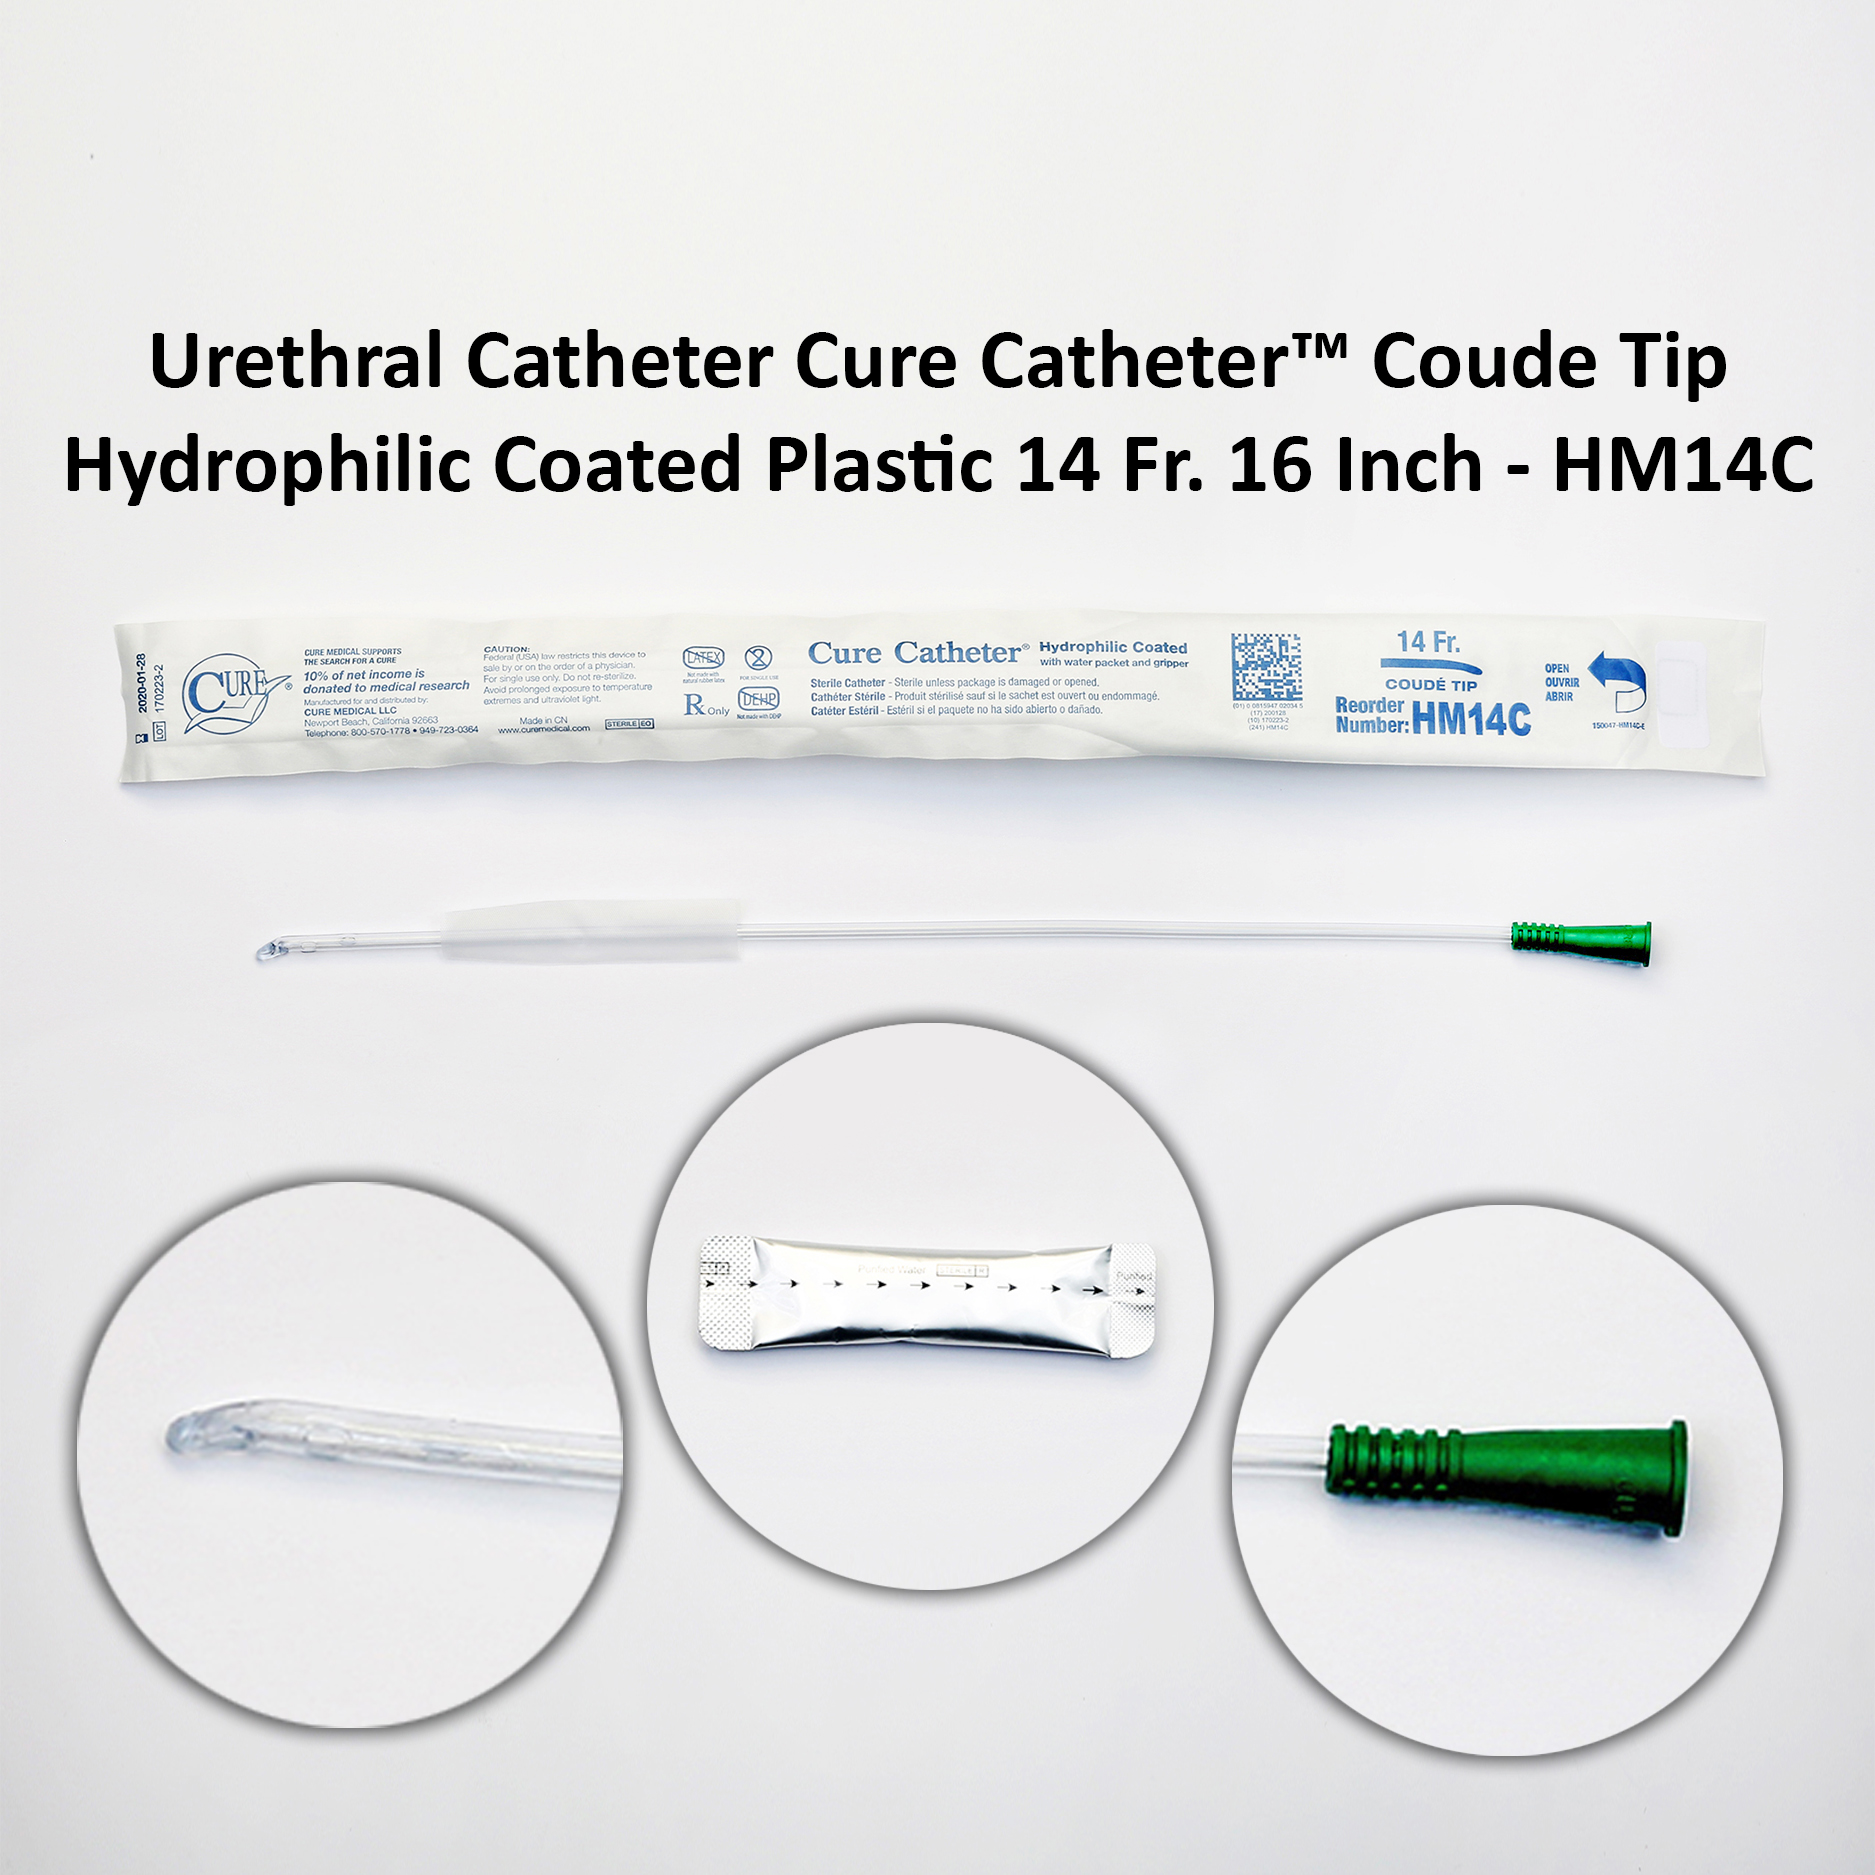 Urethral Catheter Cure Catheter™ Coude Tip Hydrophilic Coated Plastic 14 Fr. 16 Inch - HM14C Michigan | USA